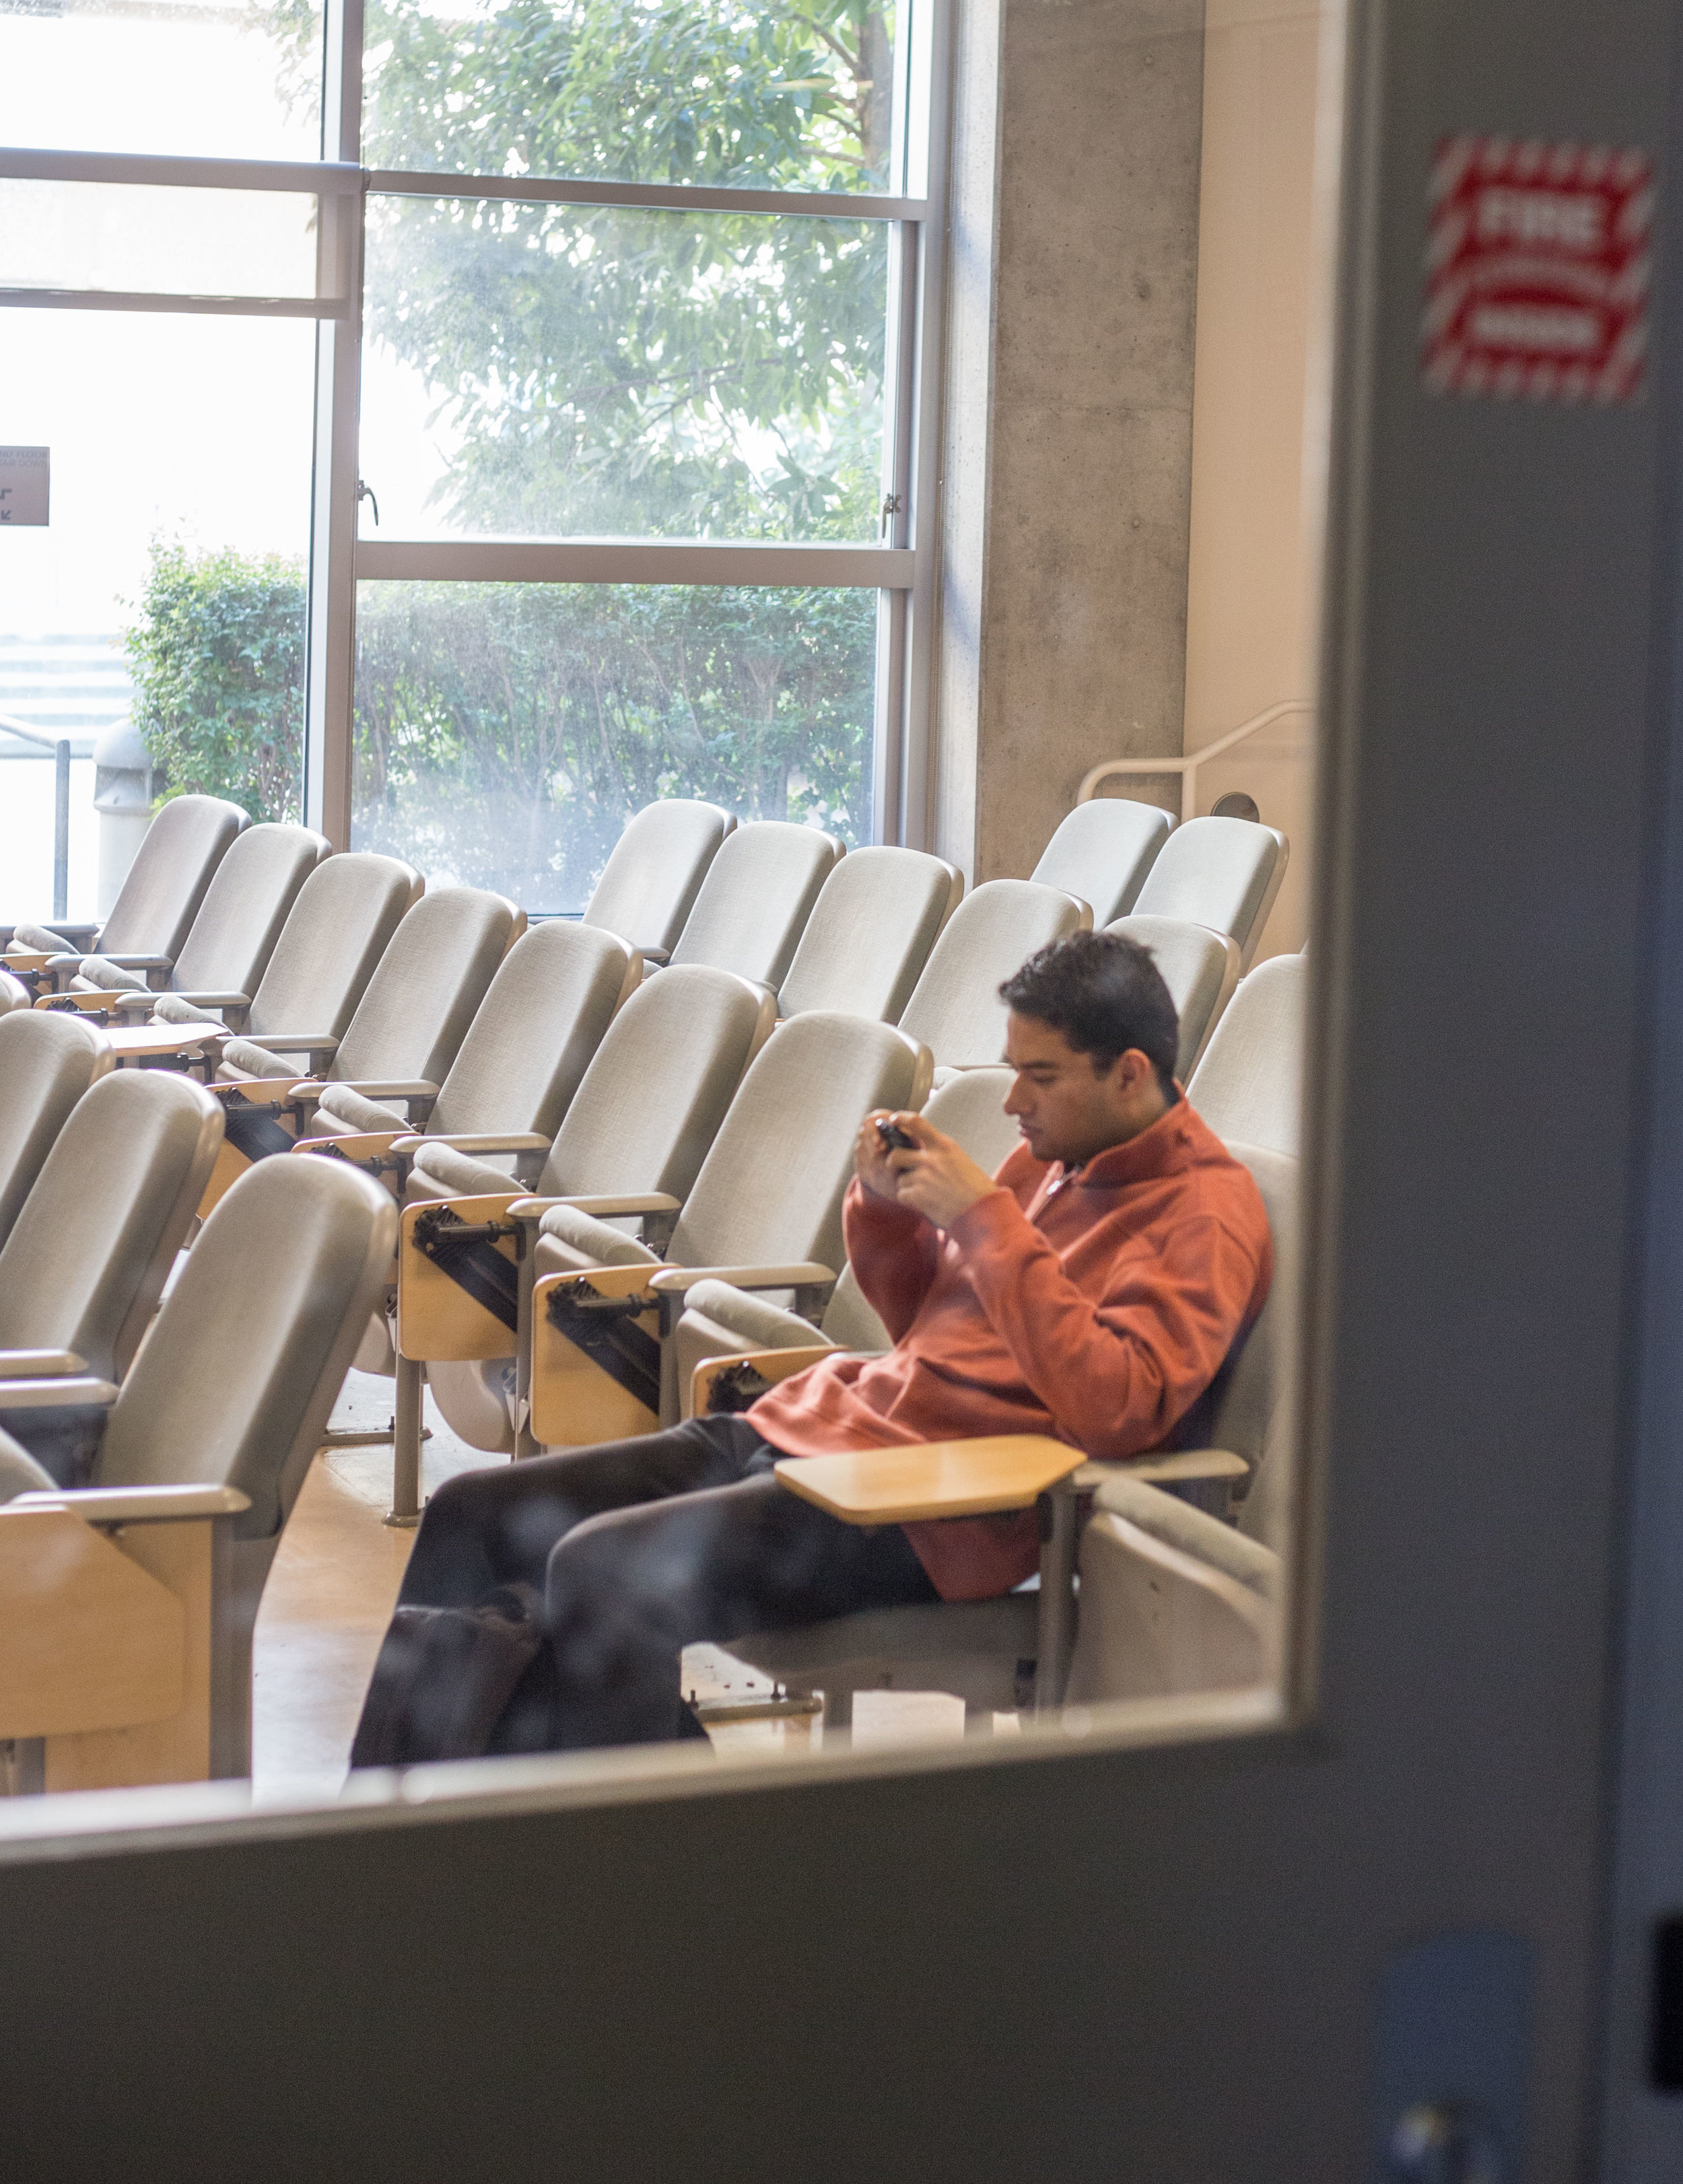  Santa Monica College student, refused to give name, sits alone in a classroom after SMC students were notified via email and phone call that all classes on Wednesday, December 6th were canceled due to the close proximity to the Skirball fire. This t